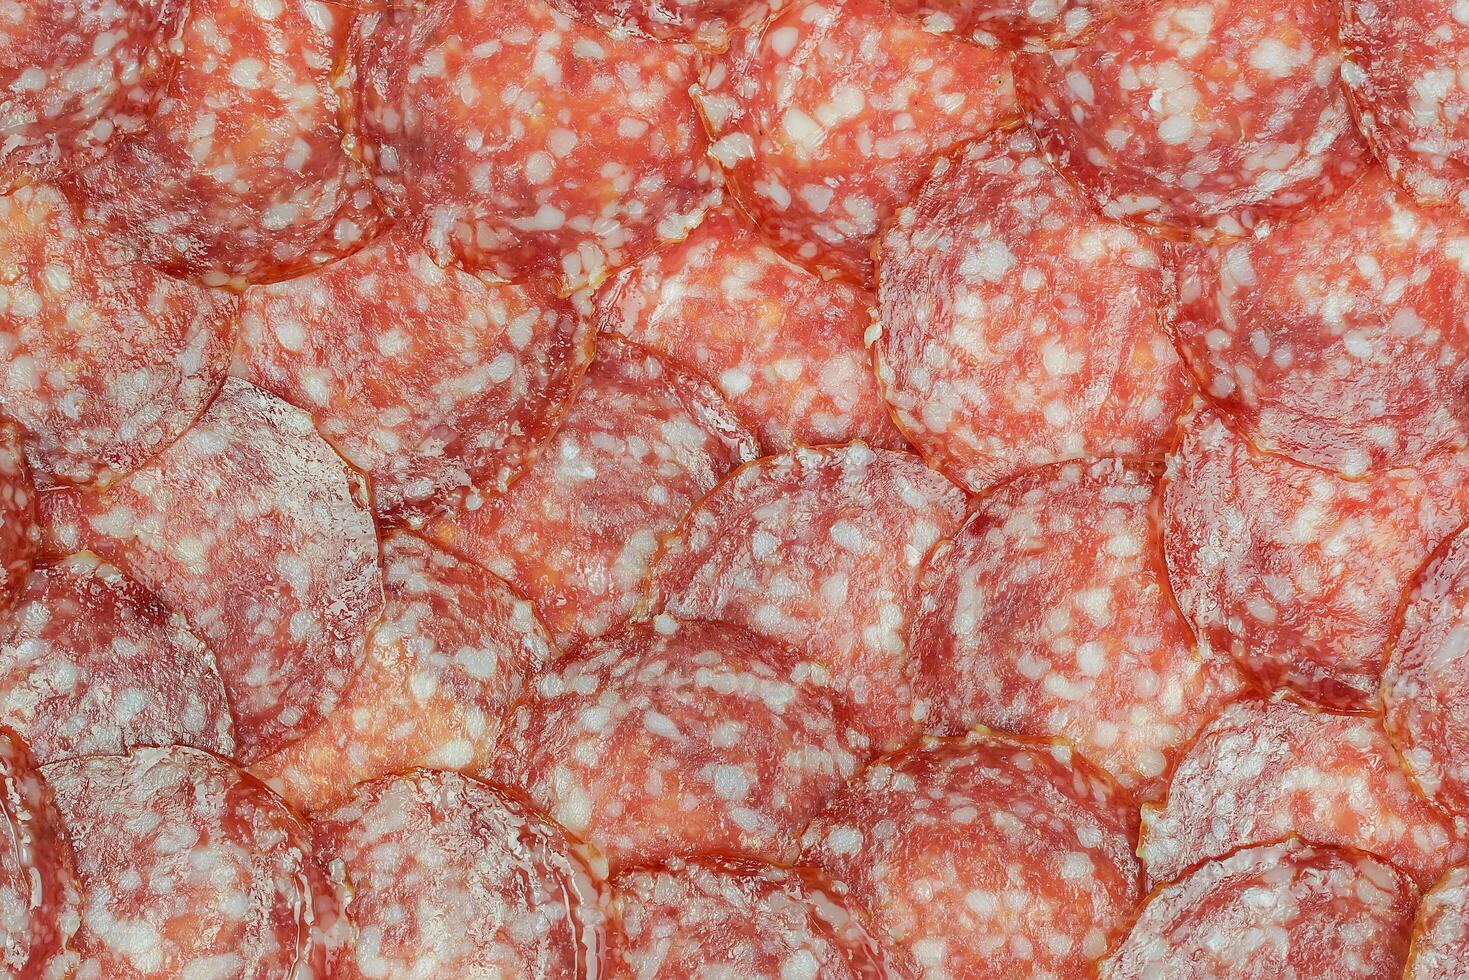 Sausage background texture, pattern from sausage slices photo